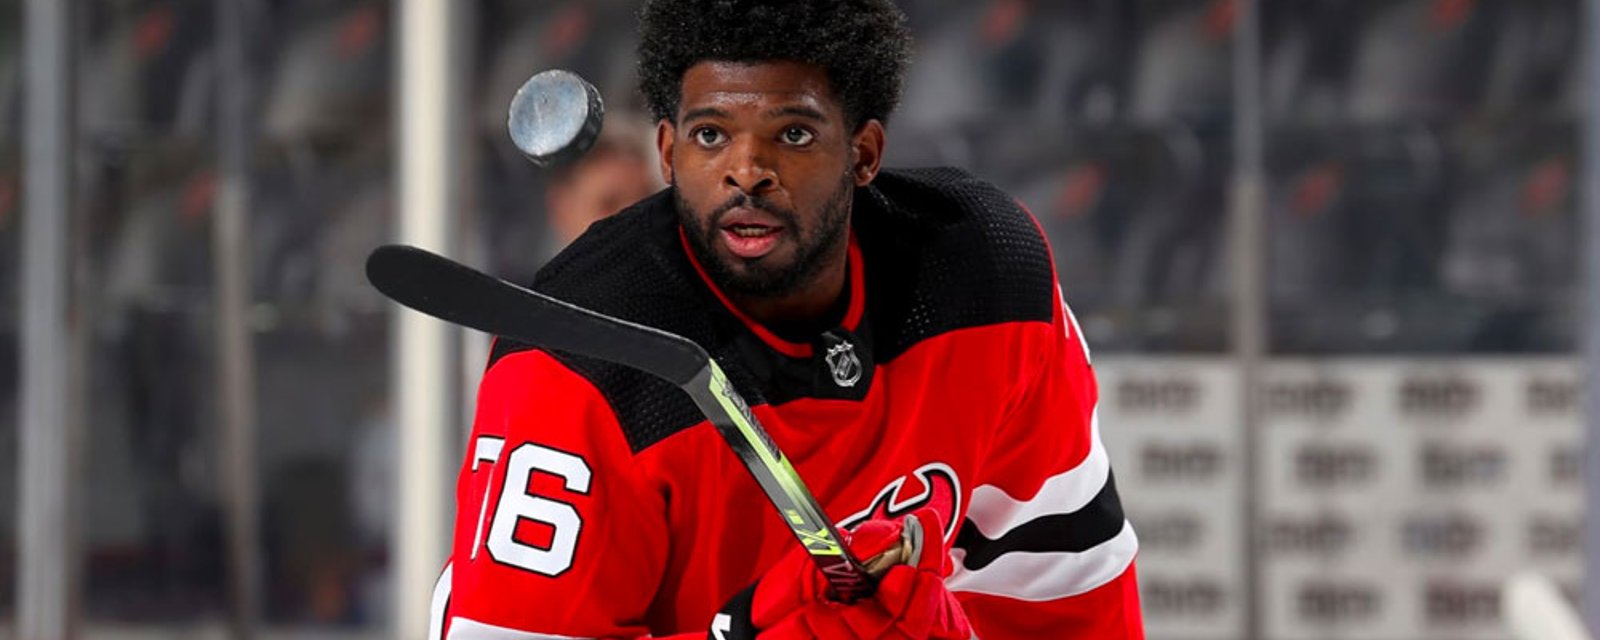 Report on P.K. Subban's future out of Toronto